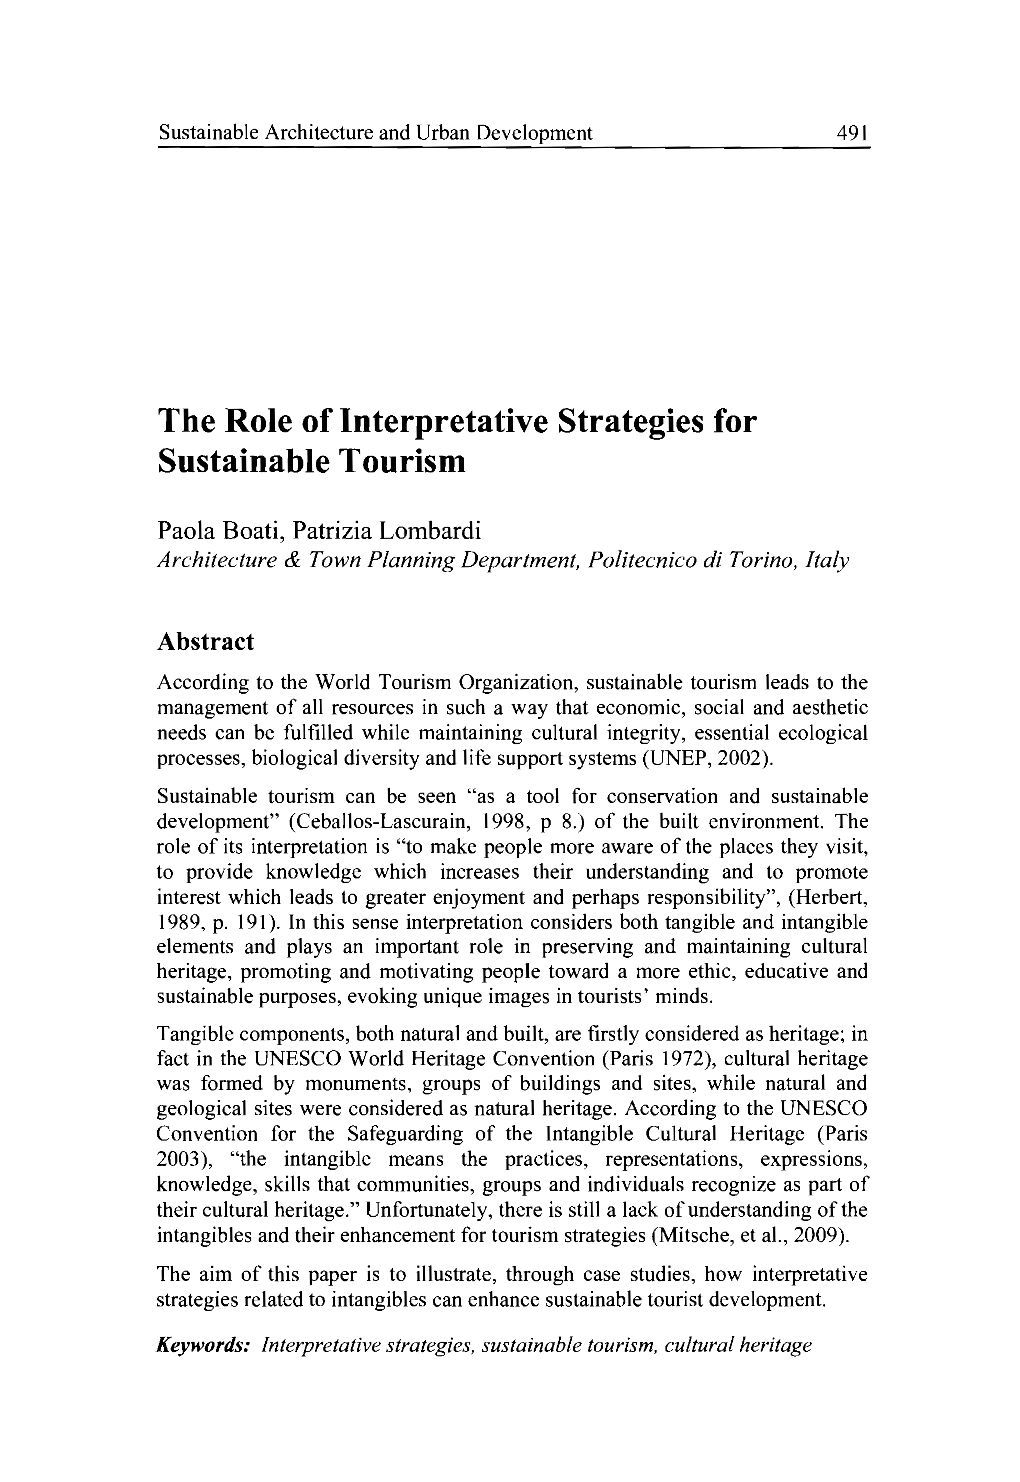 The Role of Interpretative Strategies for Sustainable Tourism